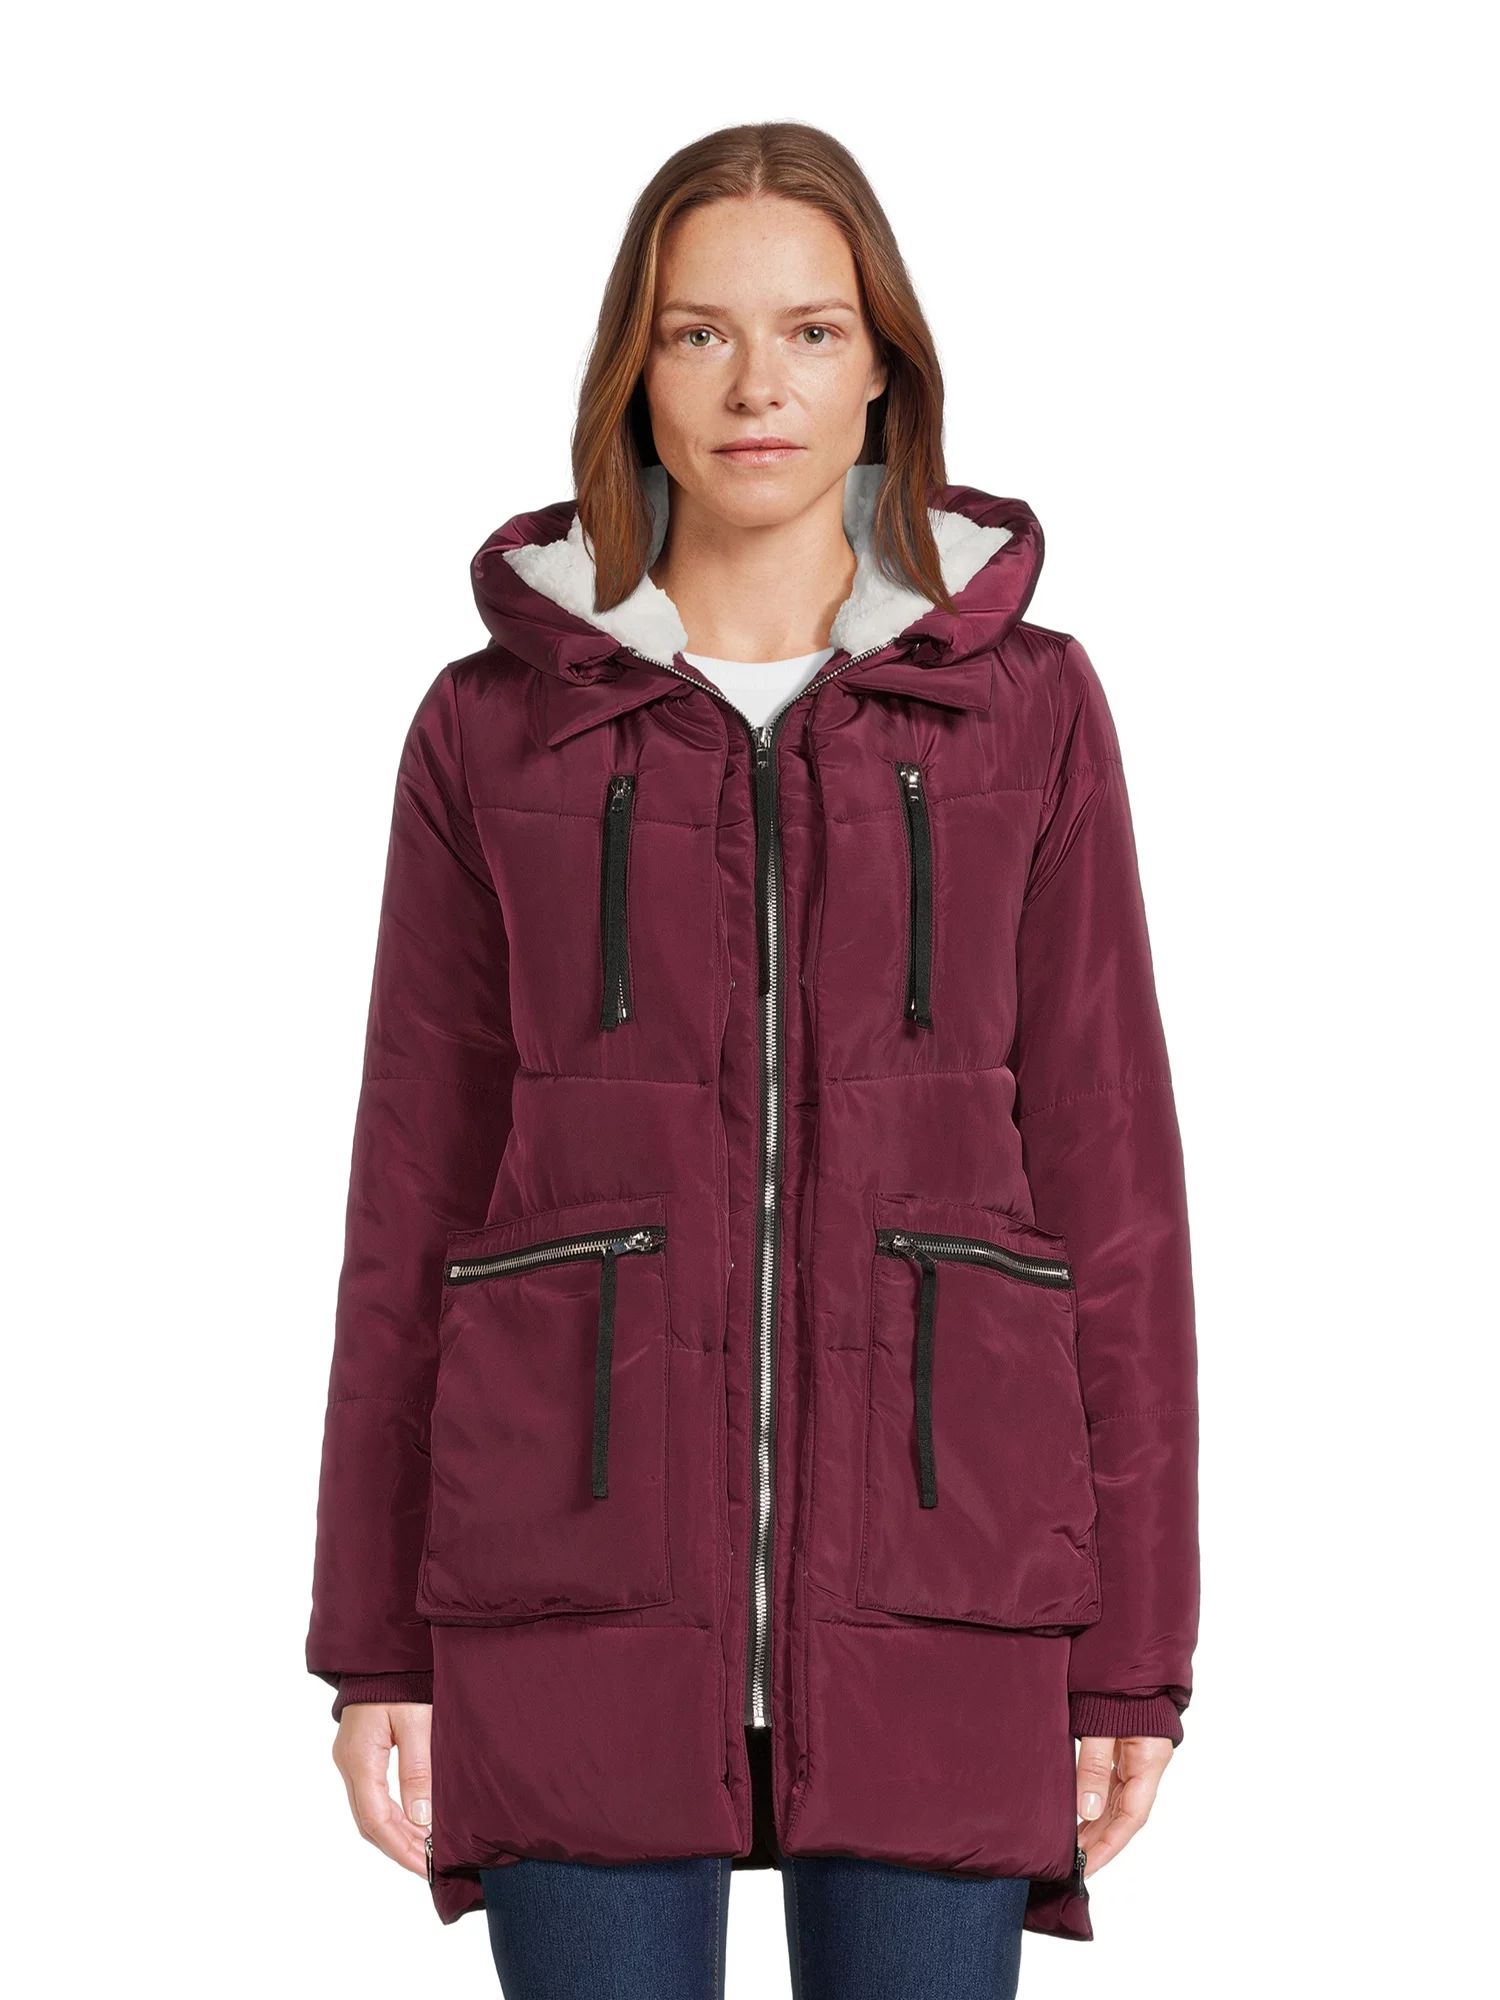 Jason Maxwell Women's Puffer Coat with Faux Shearling Lined Hood, Sizes S-XL | Walmart (US)